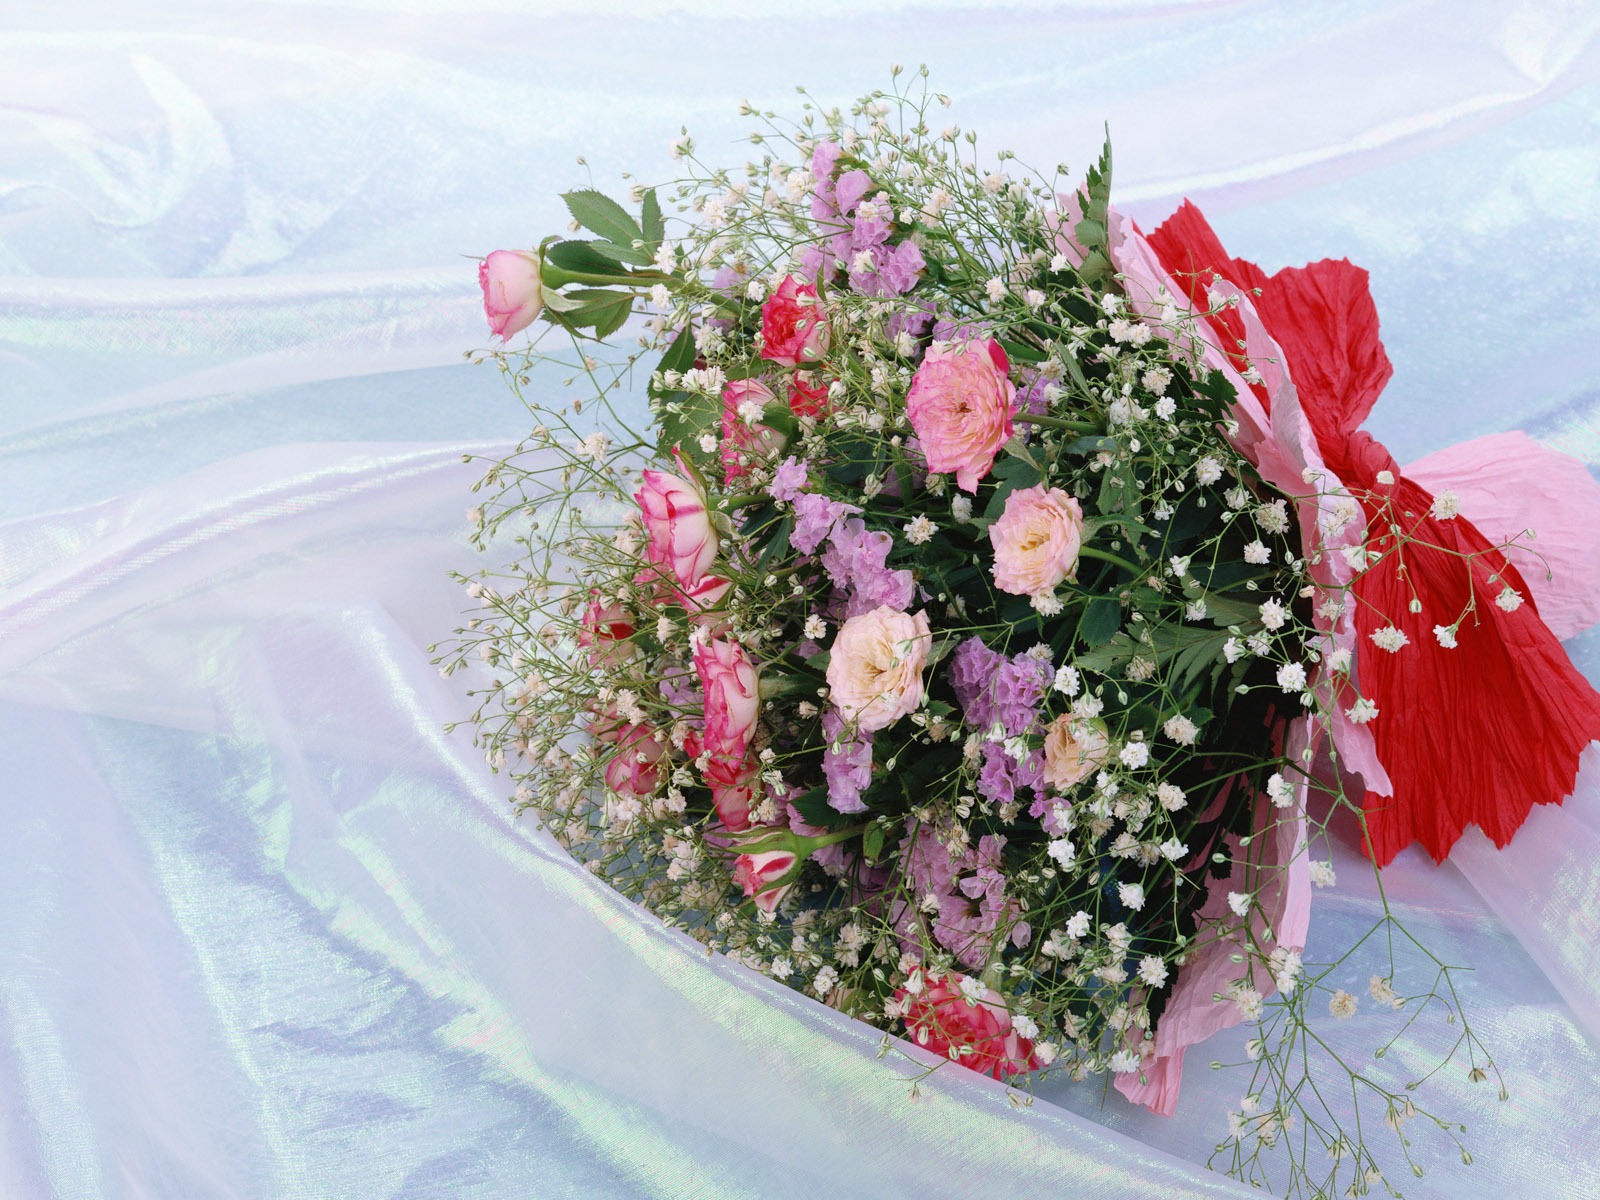 Weddings and Flowers wallpaper (2) #14 - 1600x1200